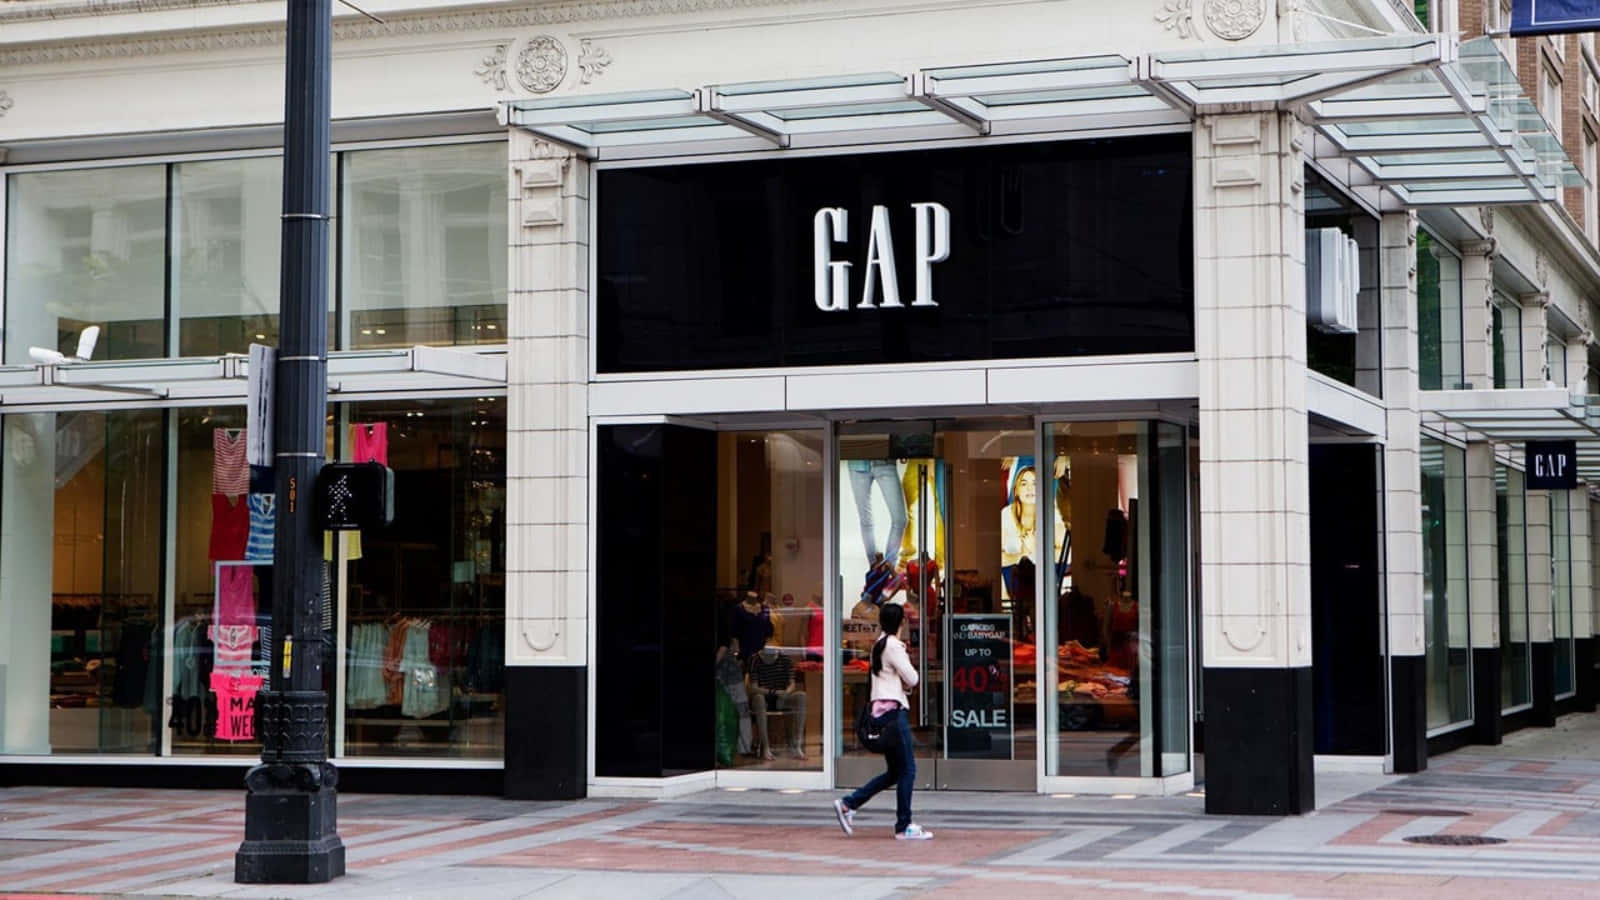 Look stylish in the latest Gap collection